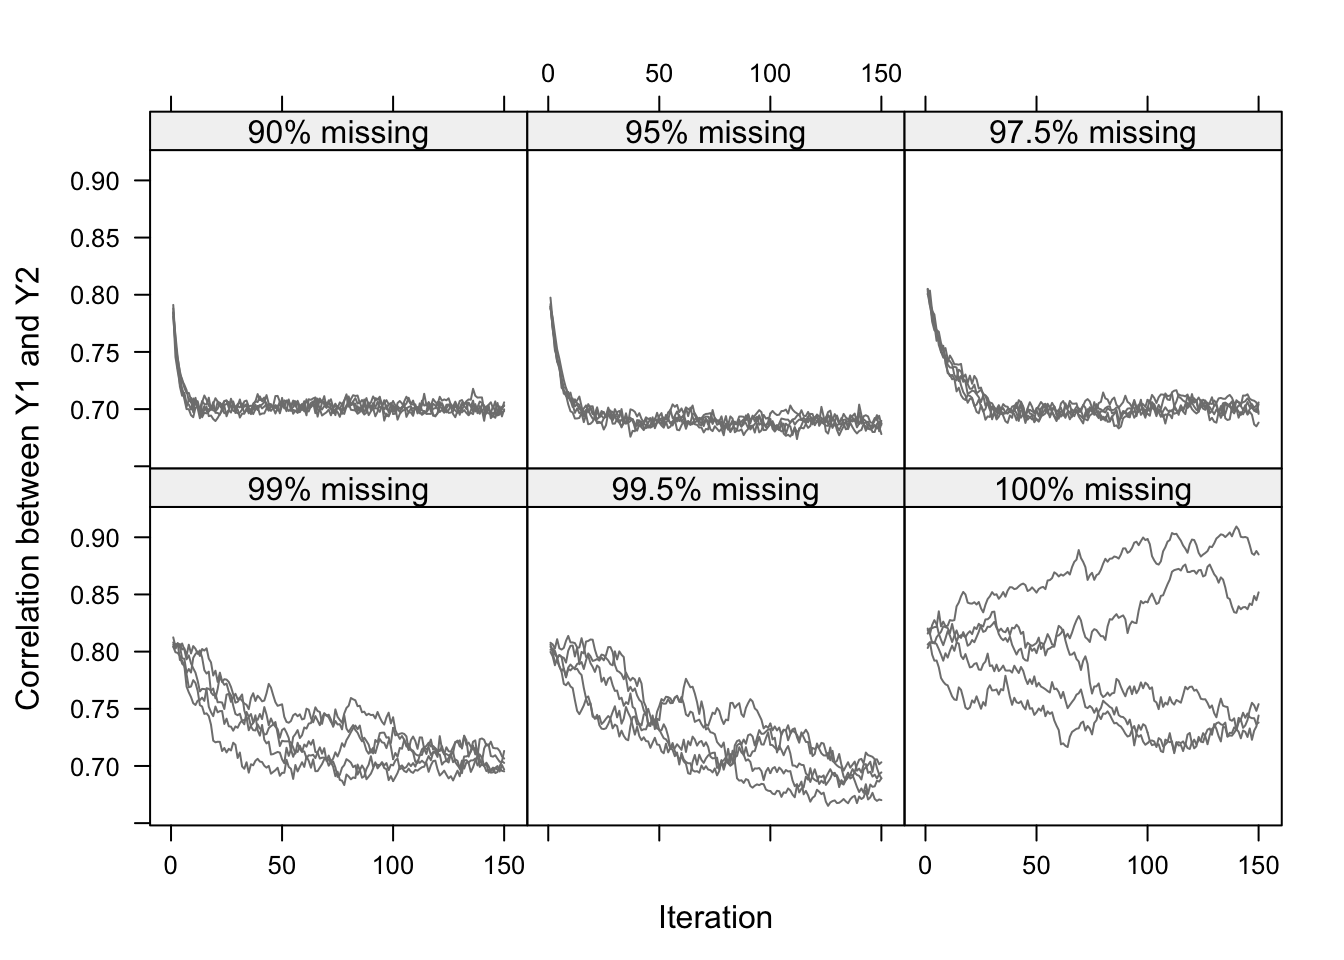 Correlation between \(Y_1\) and \(Y_2\) in the imputed data per iteration in five independent runs of the MICE algorithm for six levels of missing data. The true value is 0.7. The figure illustrates that convergence can be slow for high percentages of missing data.